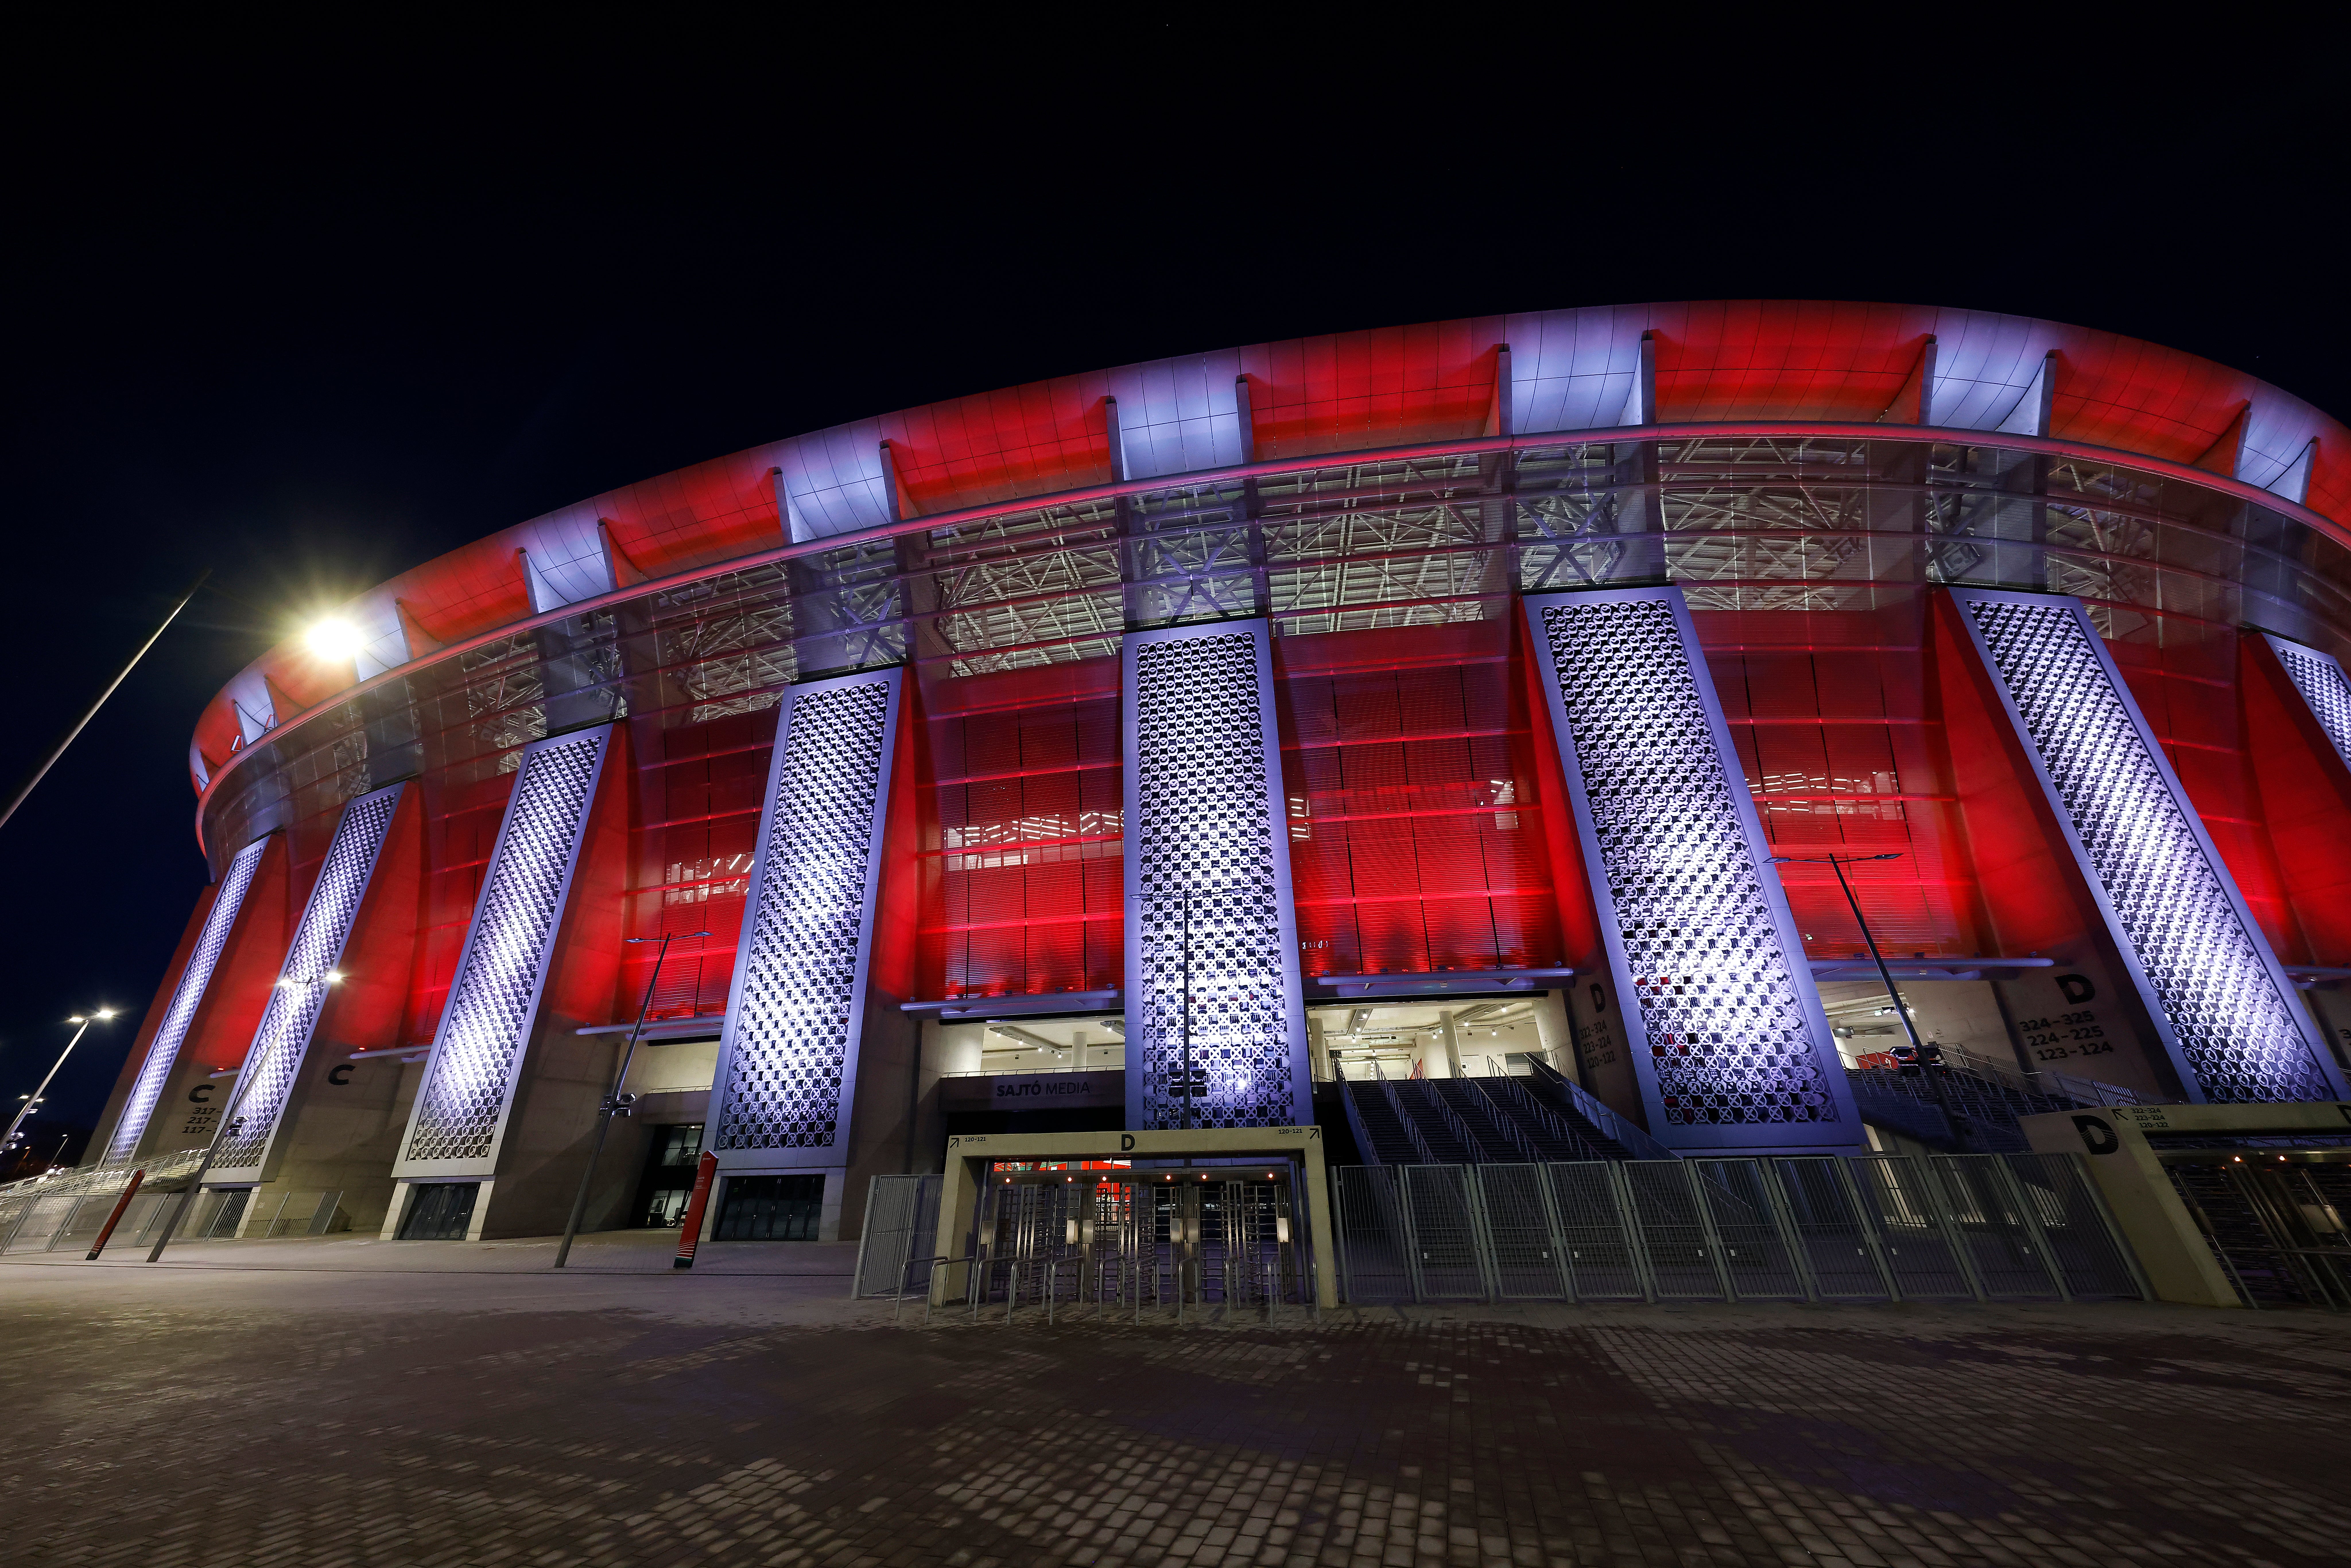 The Puskas Arena will host Liverpool’s Champions League tie